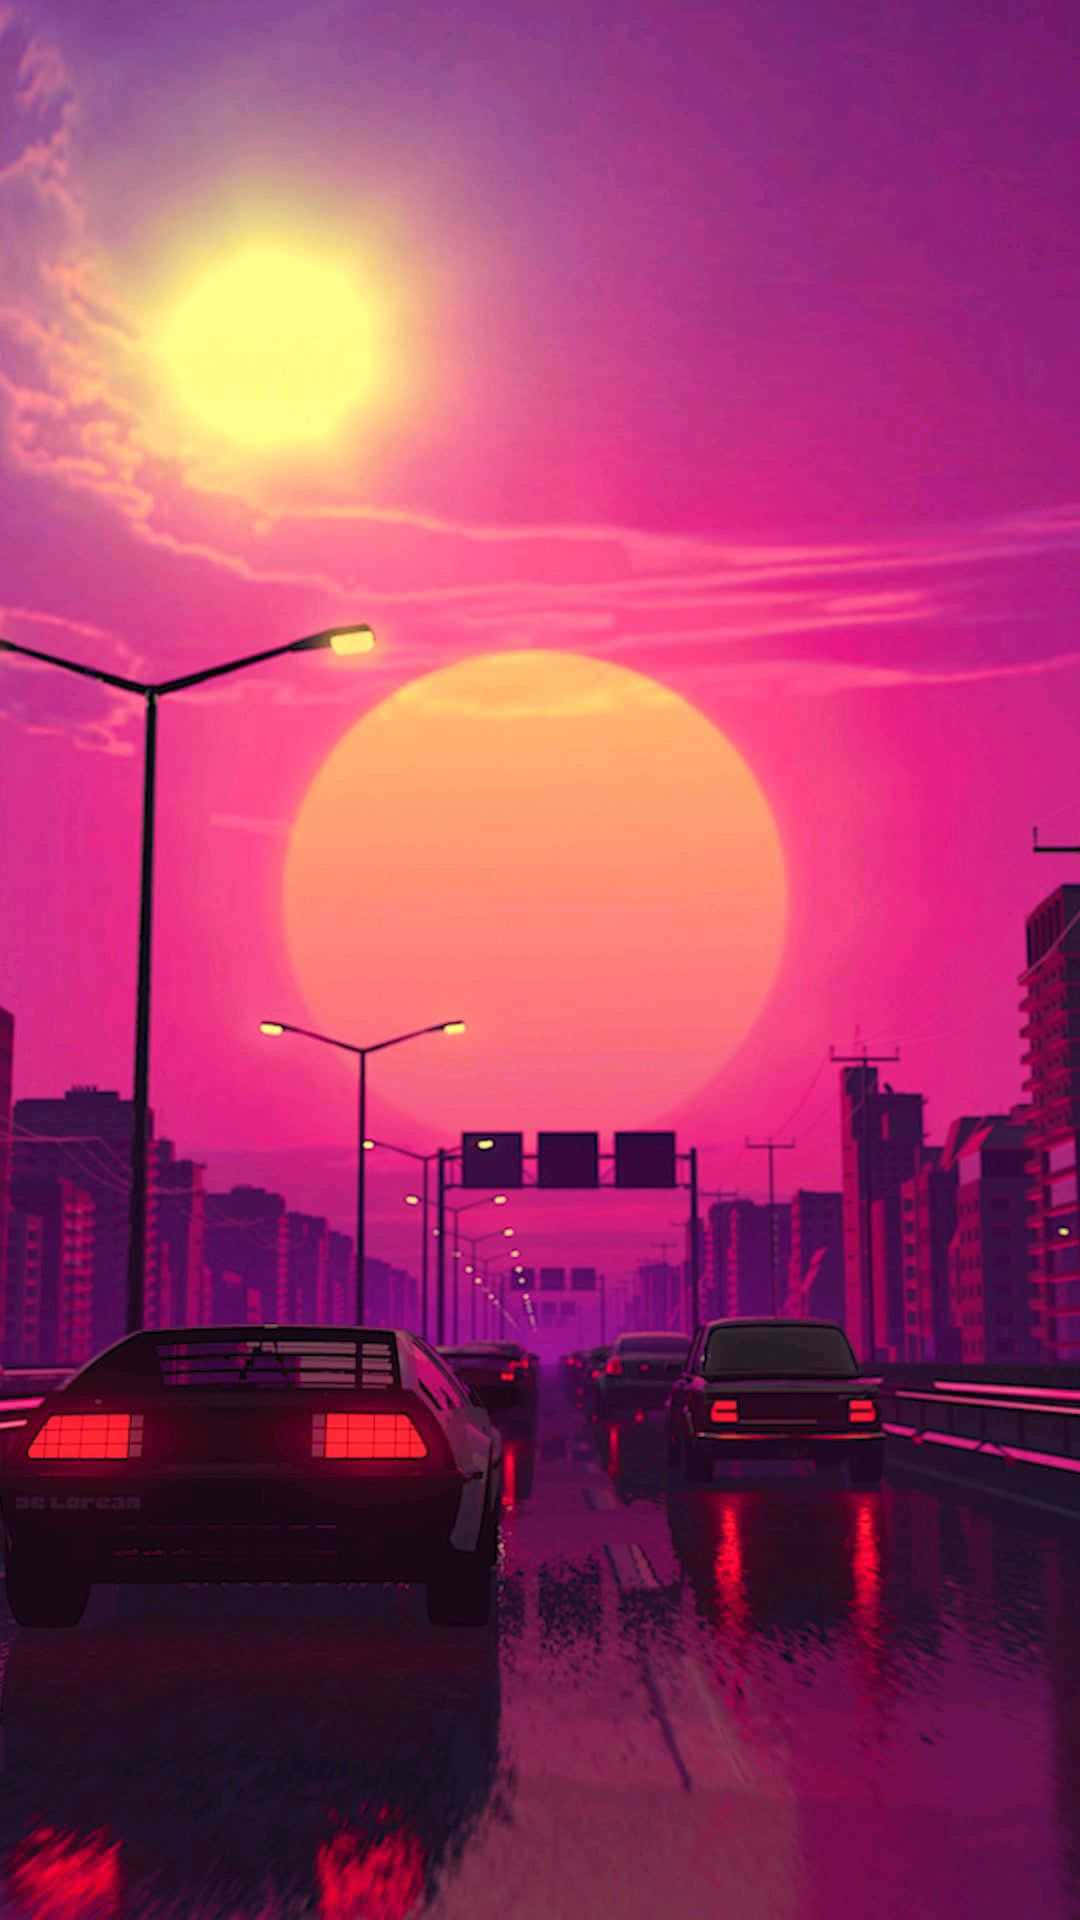 A City With Cars And A Sunset